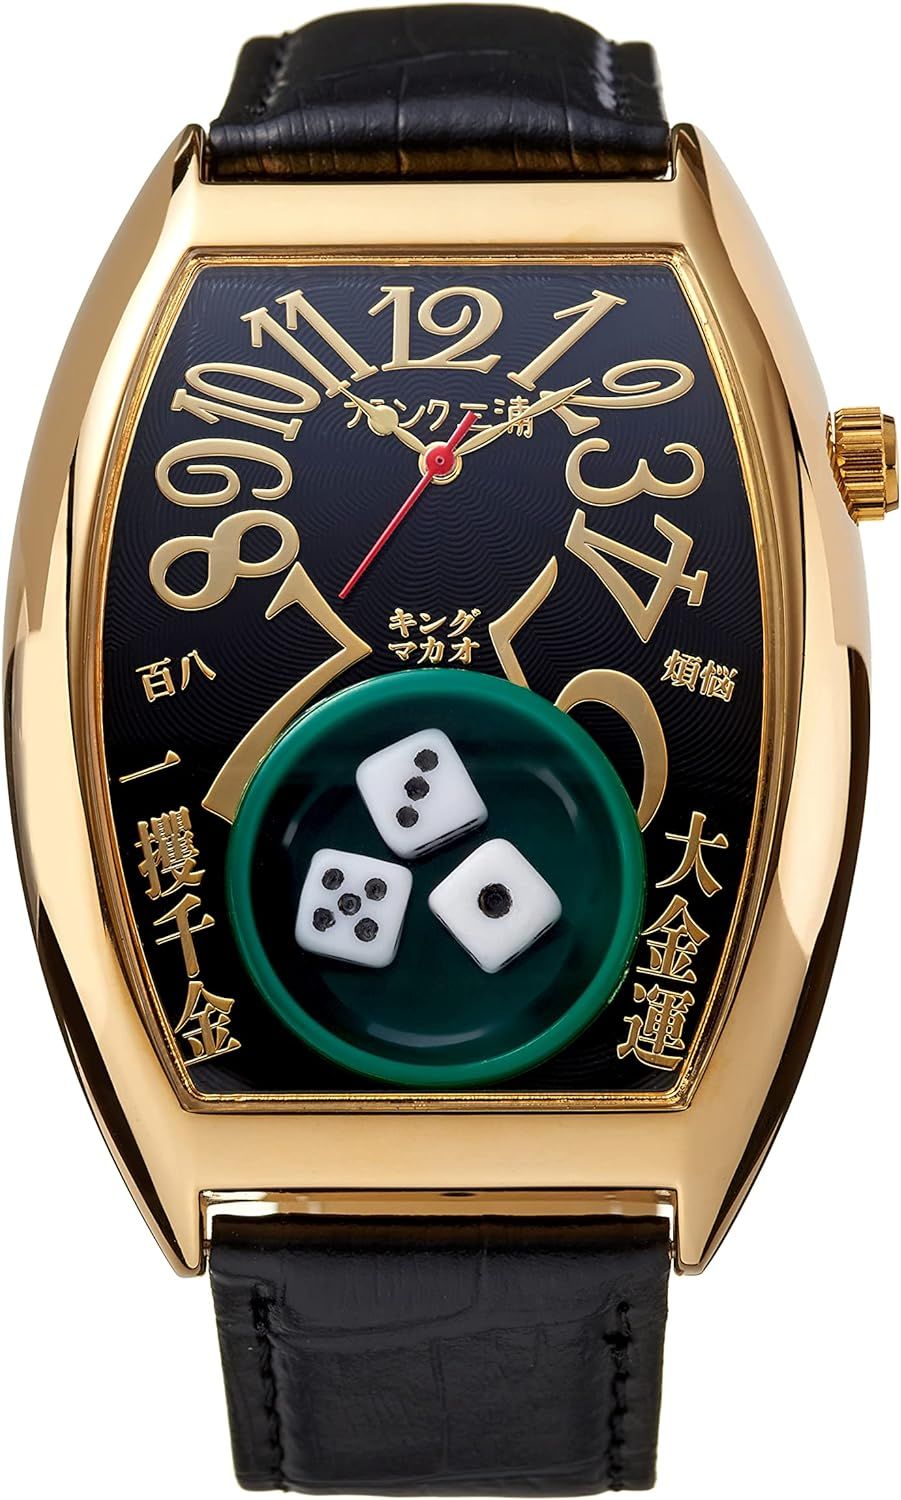 Pre-owned Japanese Brand Frank Miura Life's A Gamble Watch King Macau Dice Black Gold In Black/gold